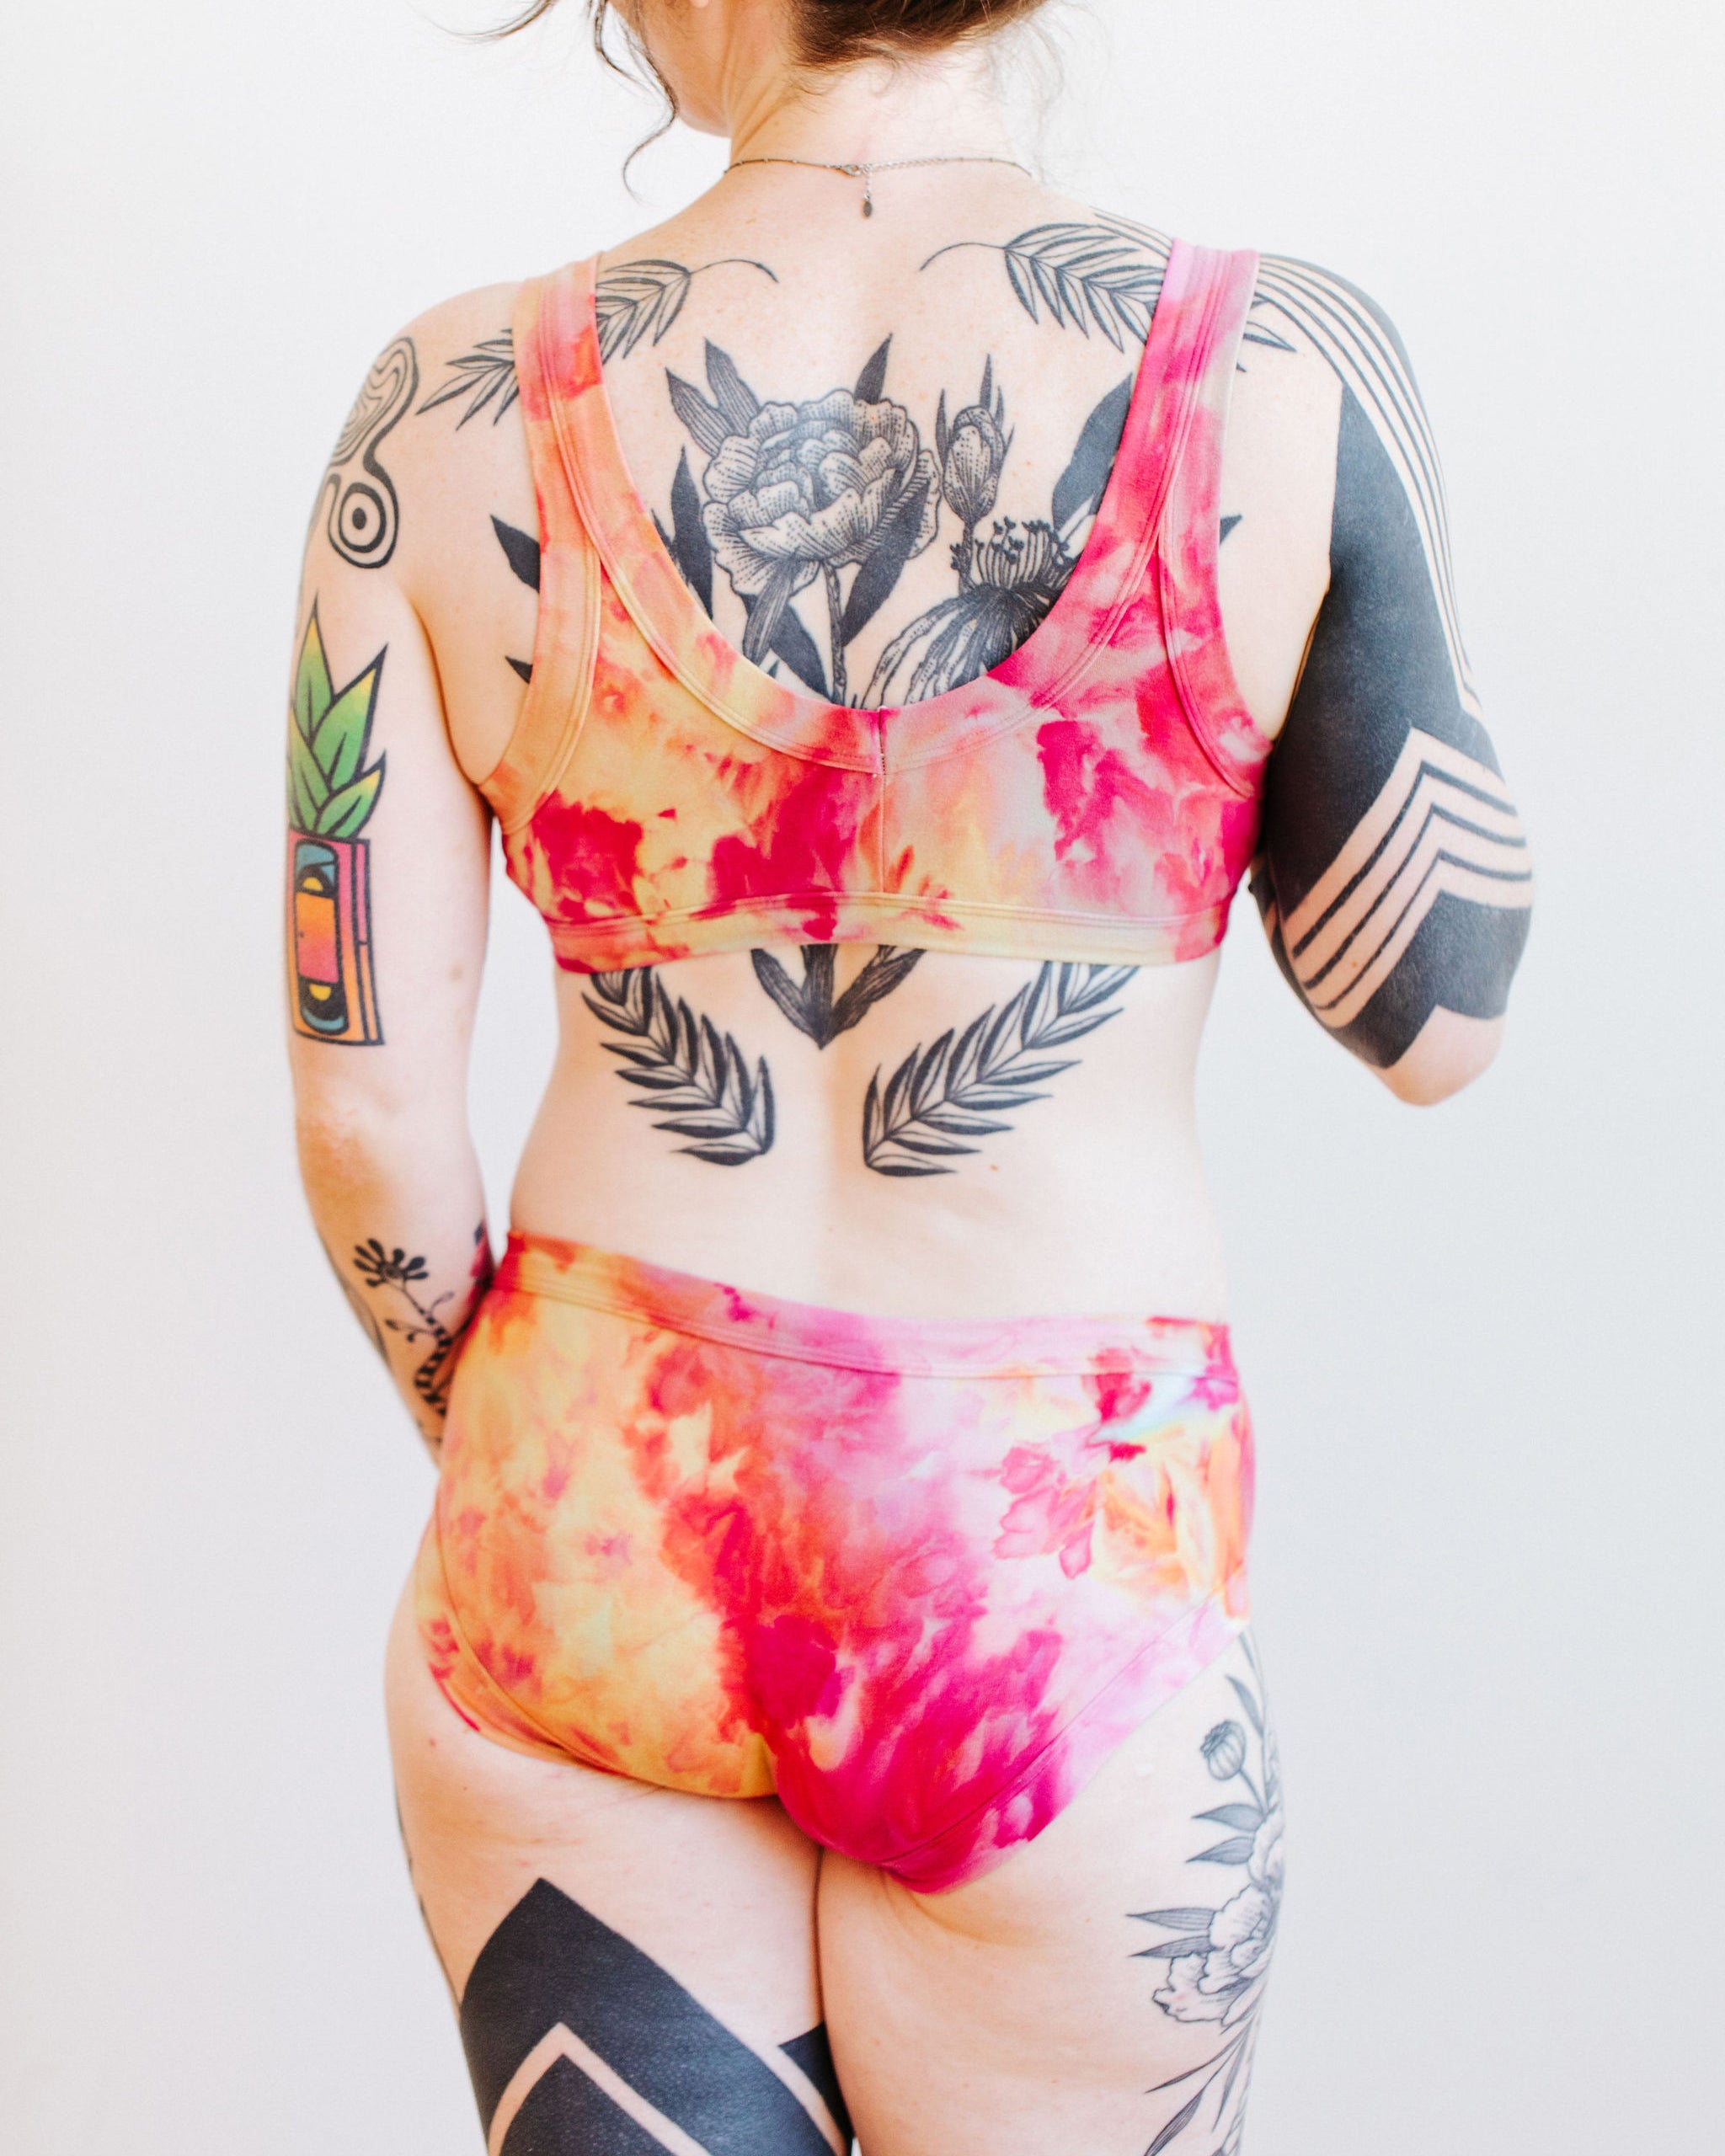 Bralette Limited Edition Hot Hibiscus Ice Dye